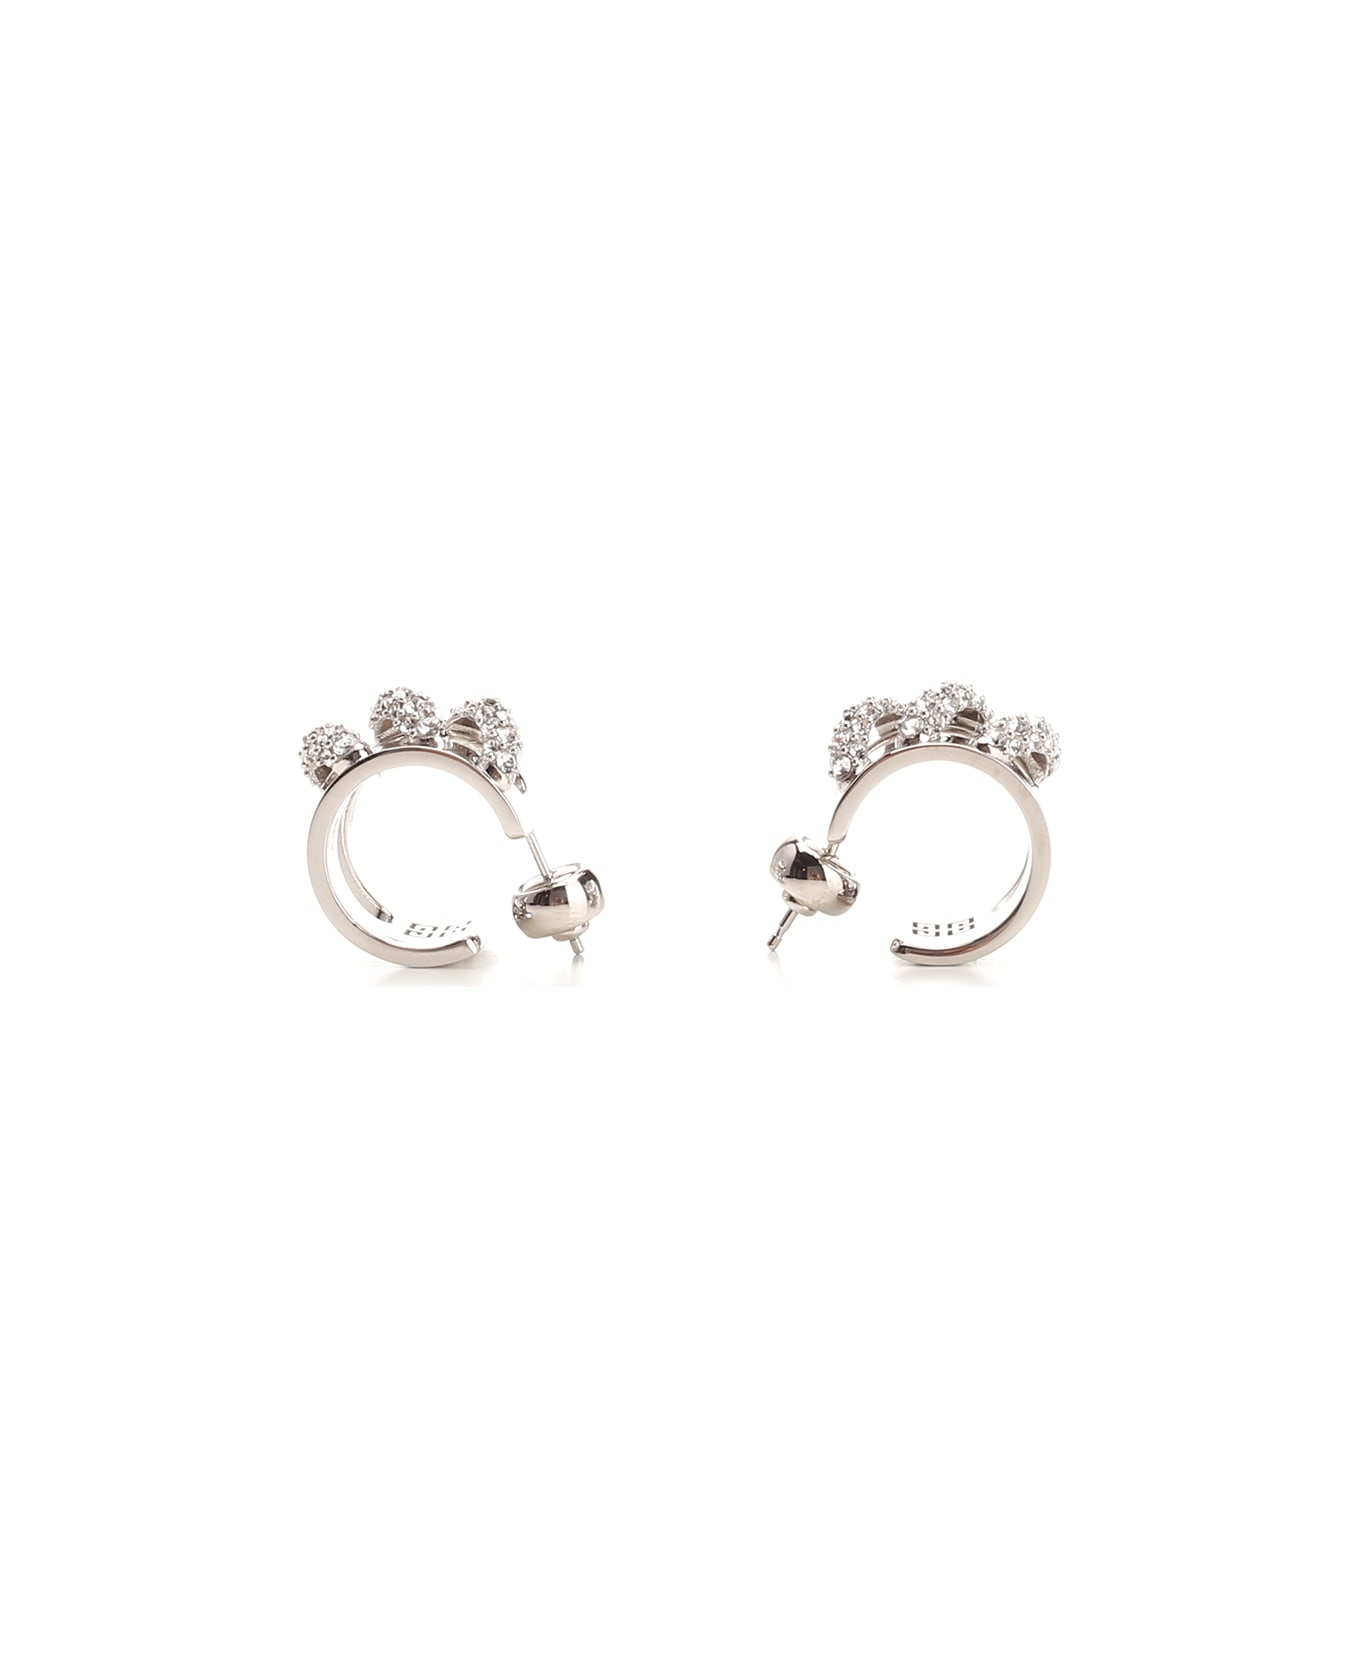 Givenchy 'stitch' Earrings - SILVERY イヤリング